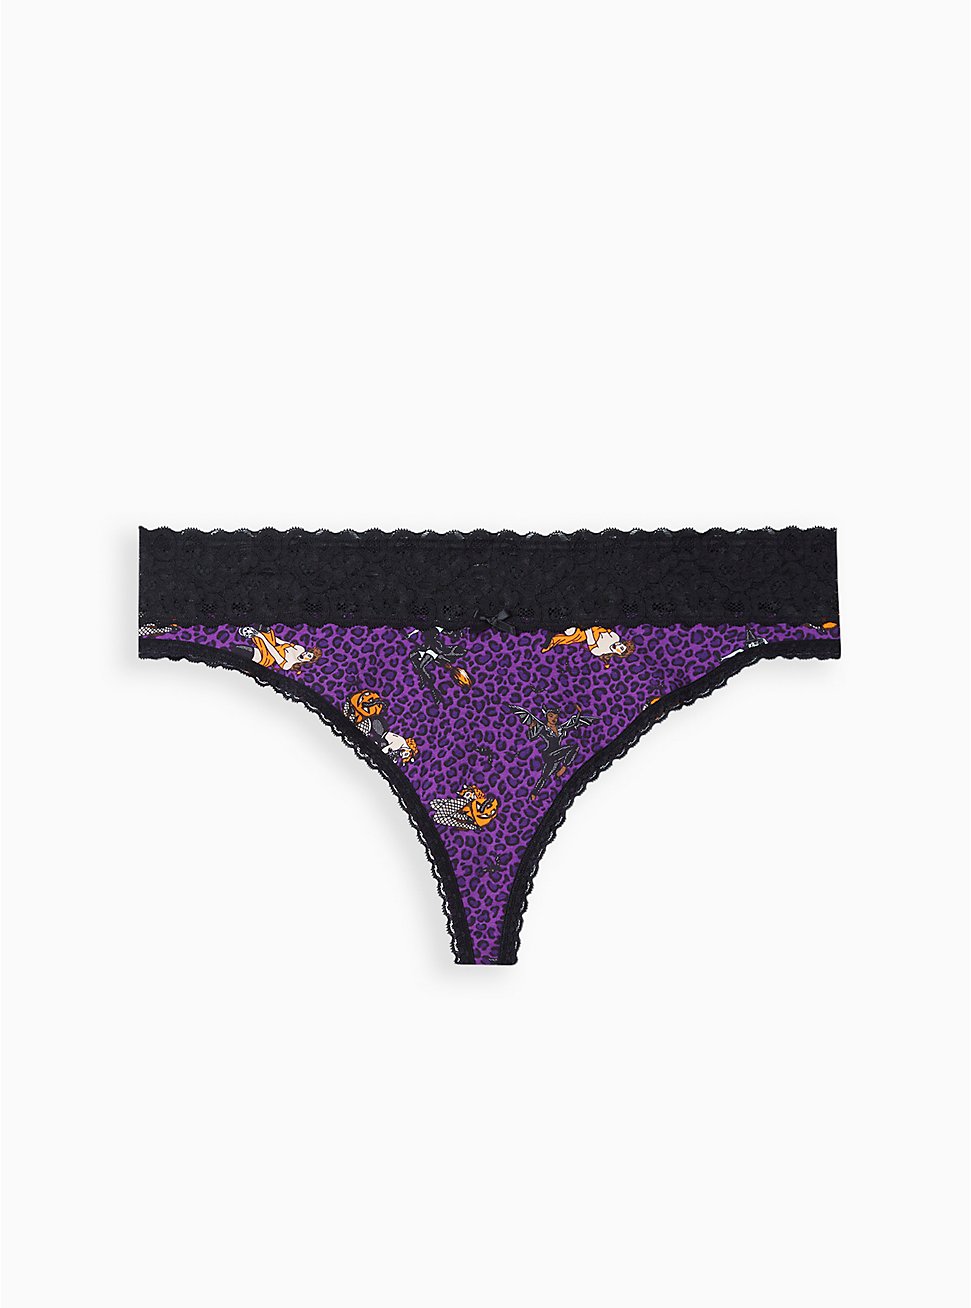 Cotton Mid-Rise Thong Lace Trim Panty, PIN UP HALLOWEEN PURPLE, hi-res